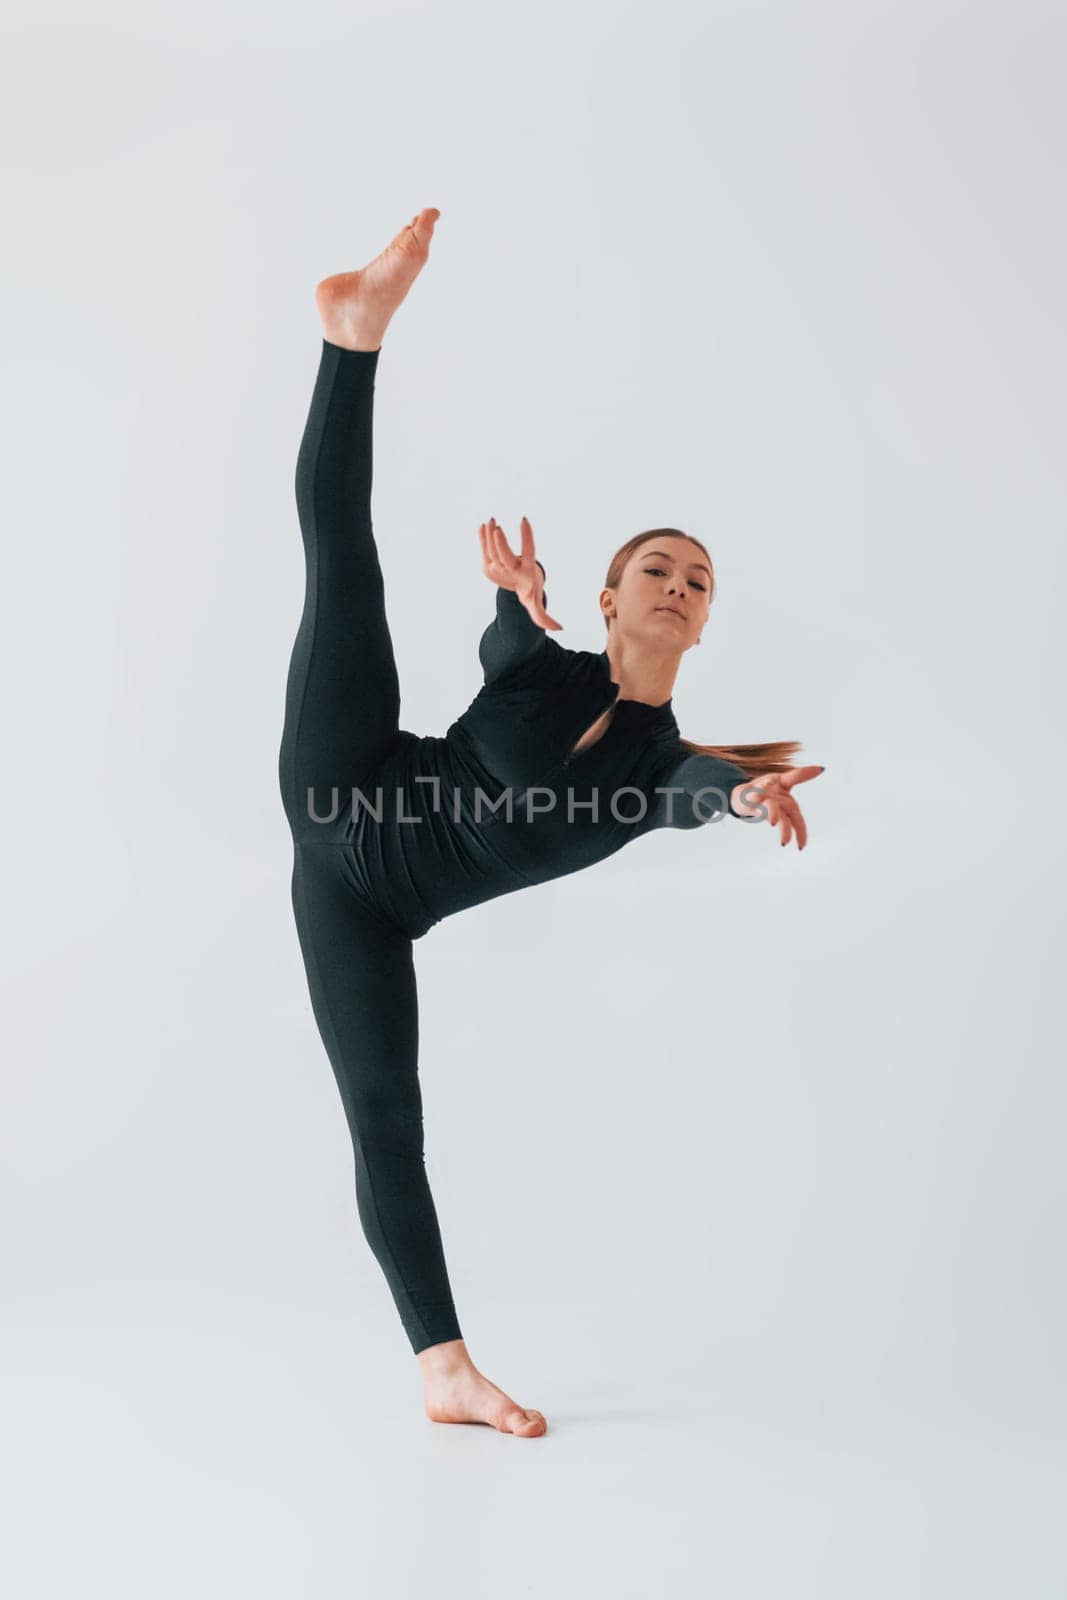 Slim body type. Young woman in sportive clothes doing gymnastics indoors.